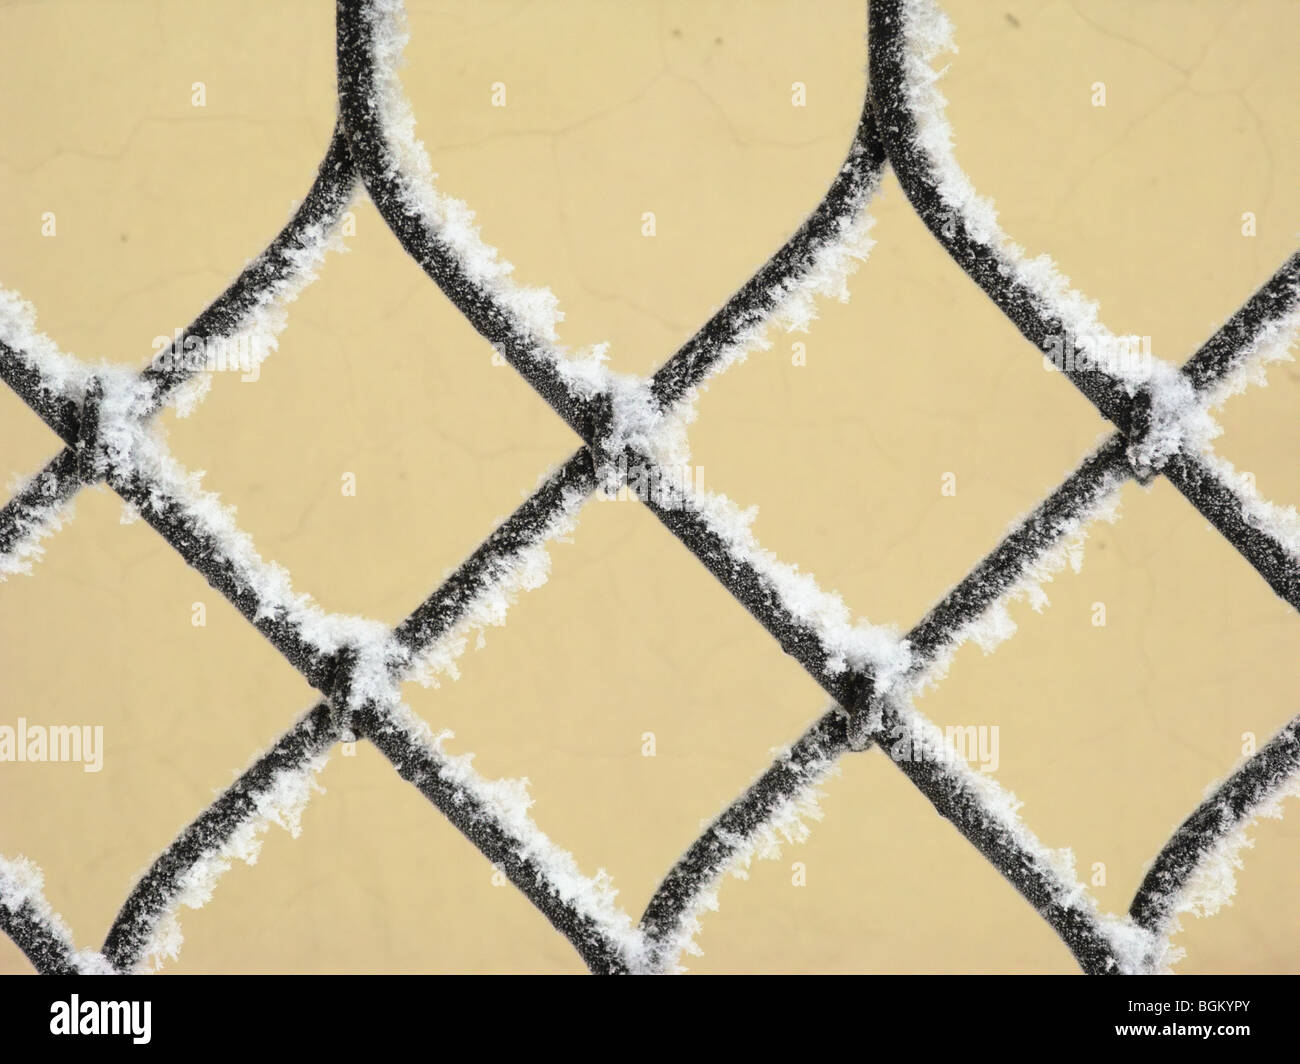 Part of decorative lattice covered with snow, close-up Stock Photo